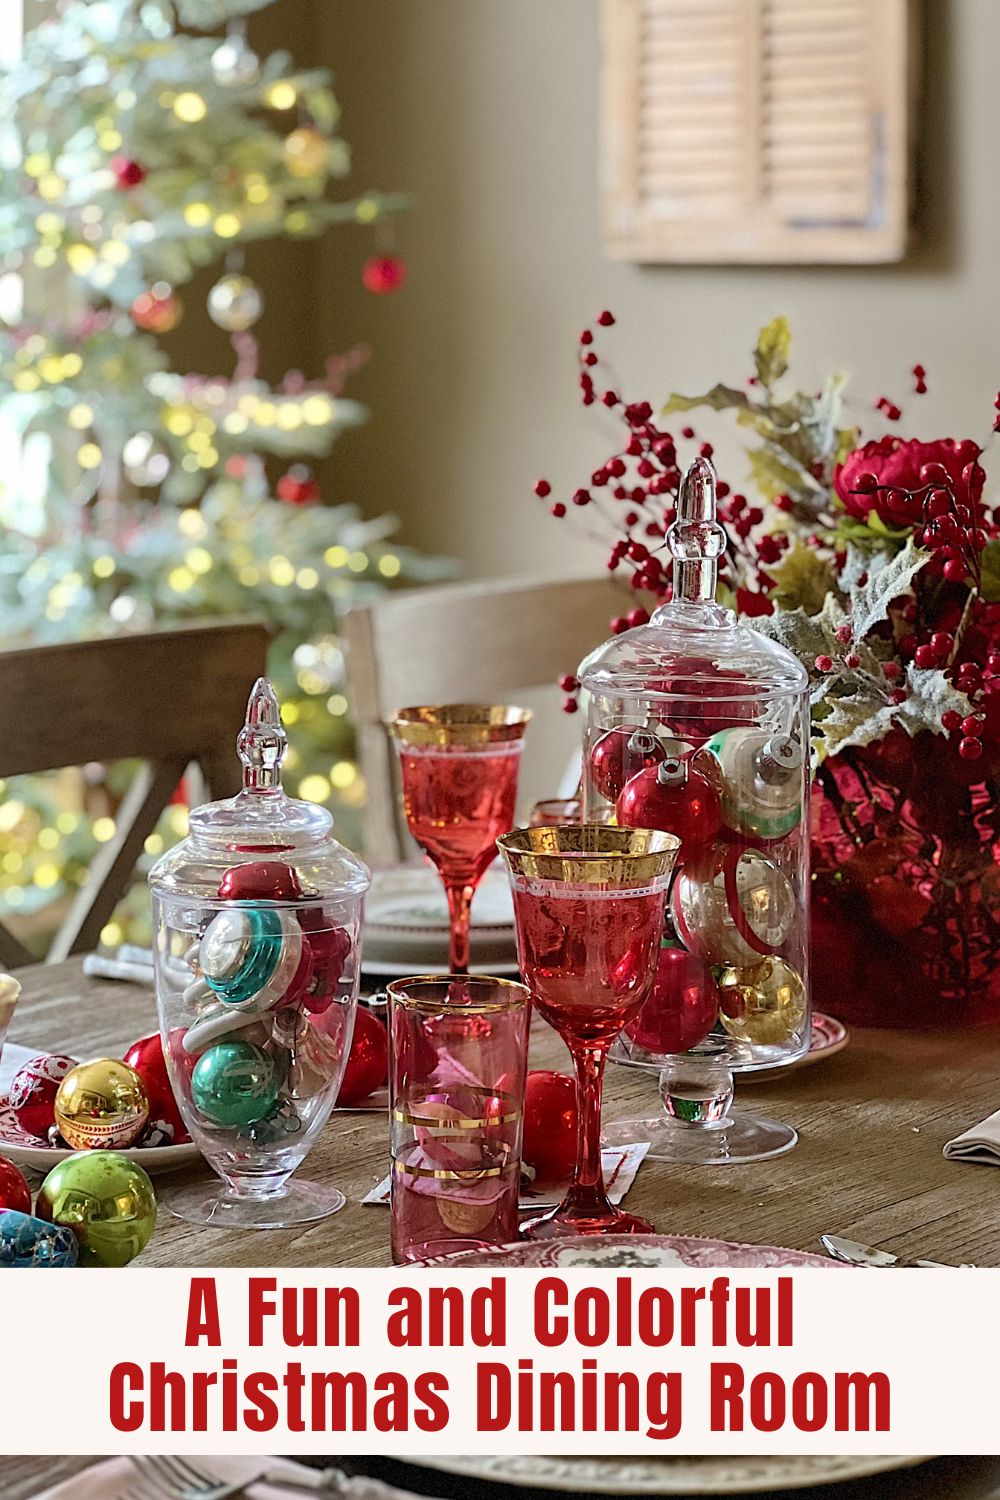 I love creating a fun and colorful Christmas dining room. We decorated with cranberry glass, Christmas dishes, and Shiny Brite ornaments.